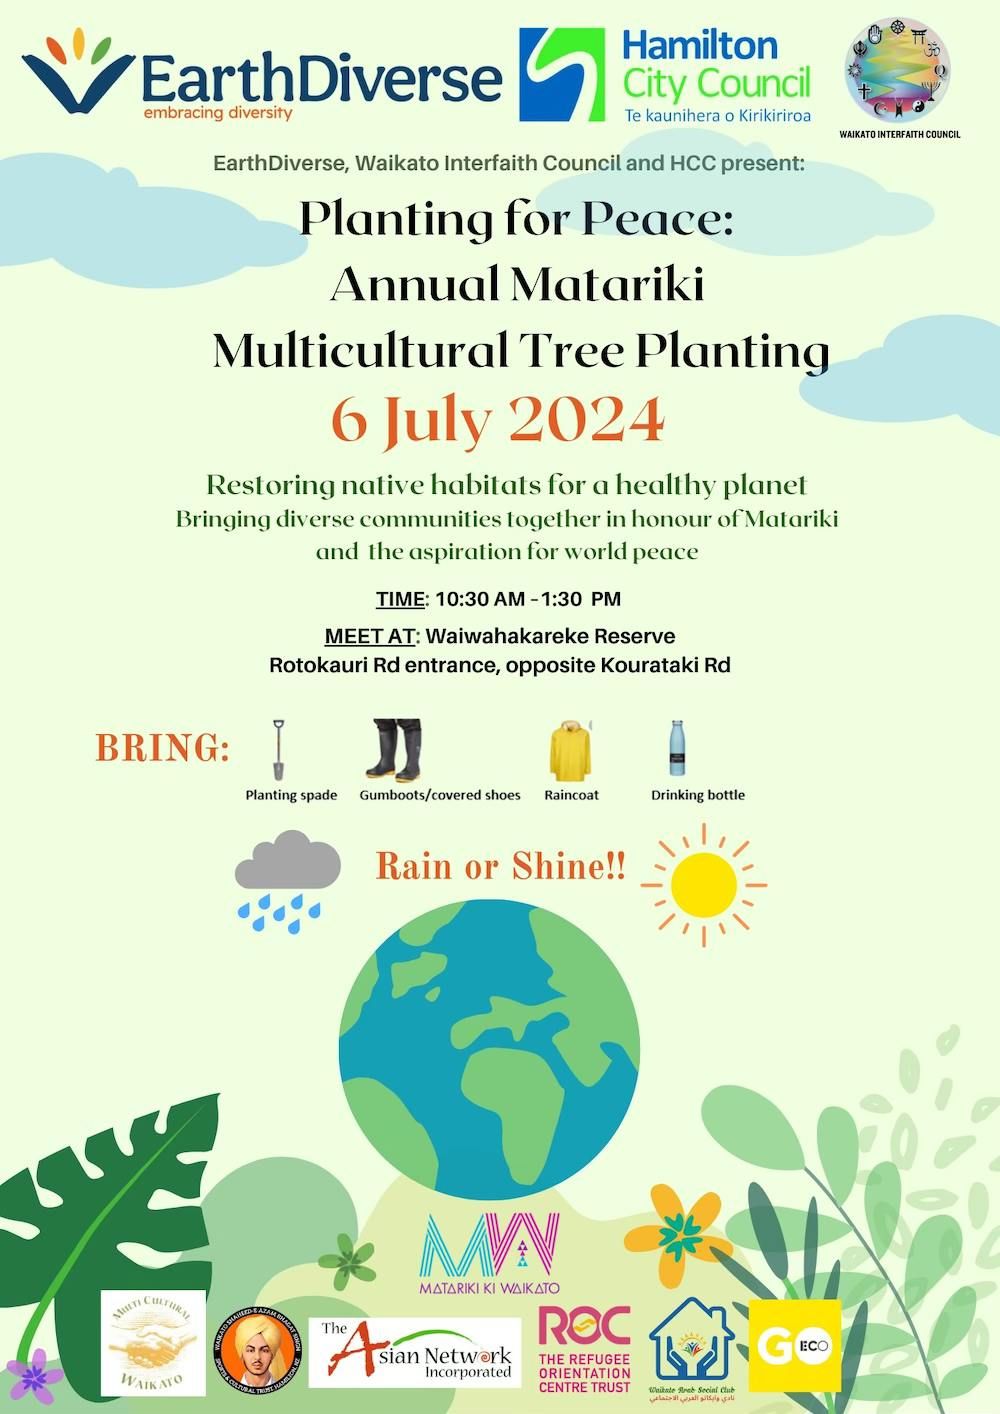 Annual Matariki Multicultural Tree Planting: Planting for Peace!